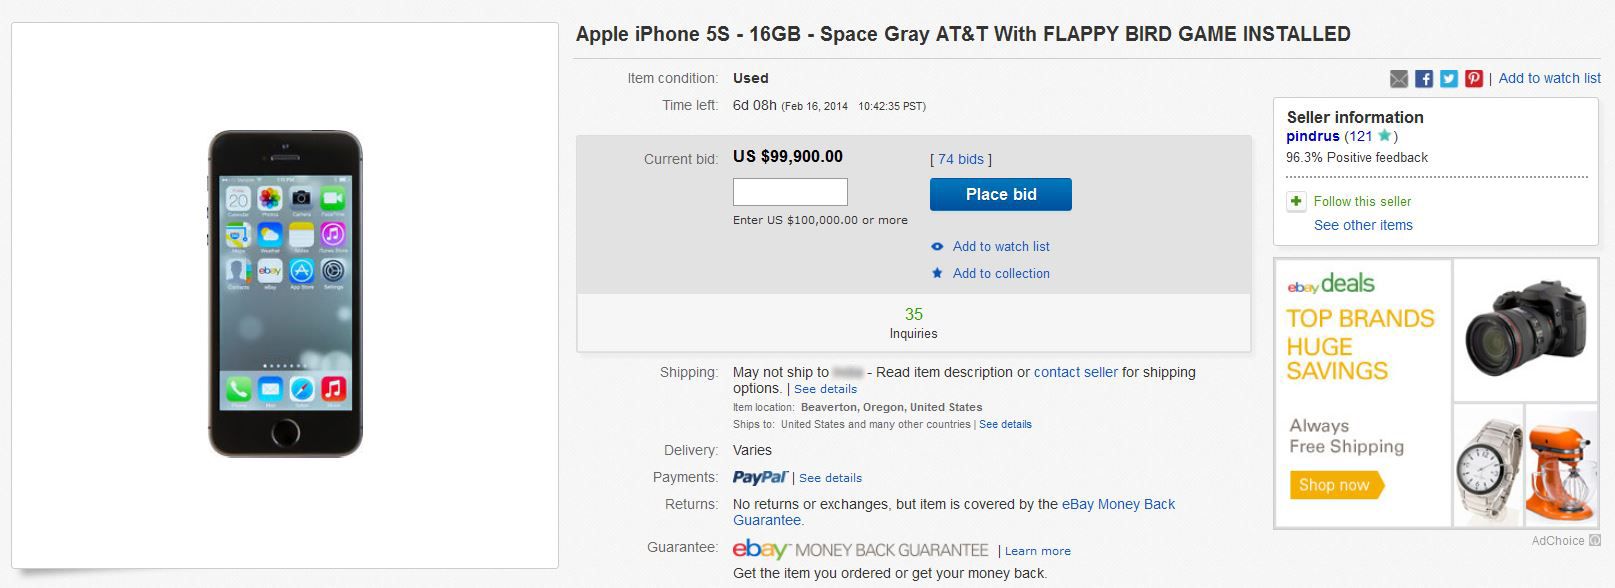 Flappy Bird Effect Used iPhones With Defunct Game Available For 100K